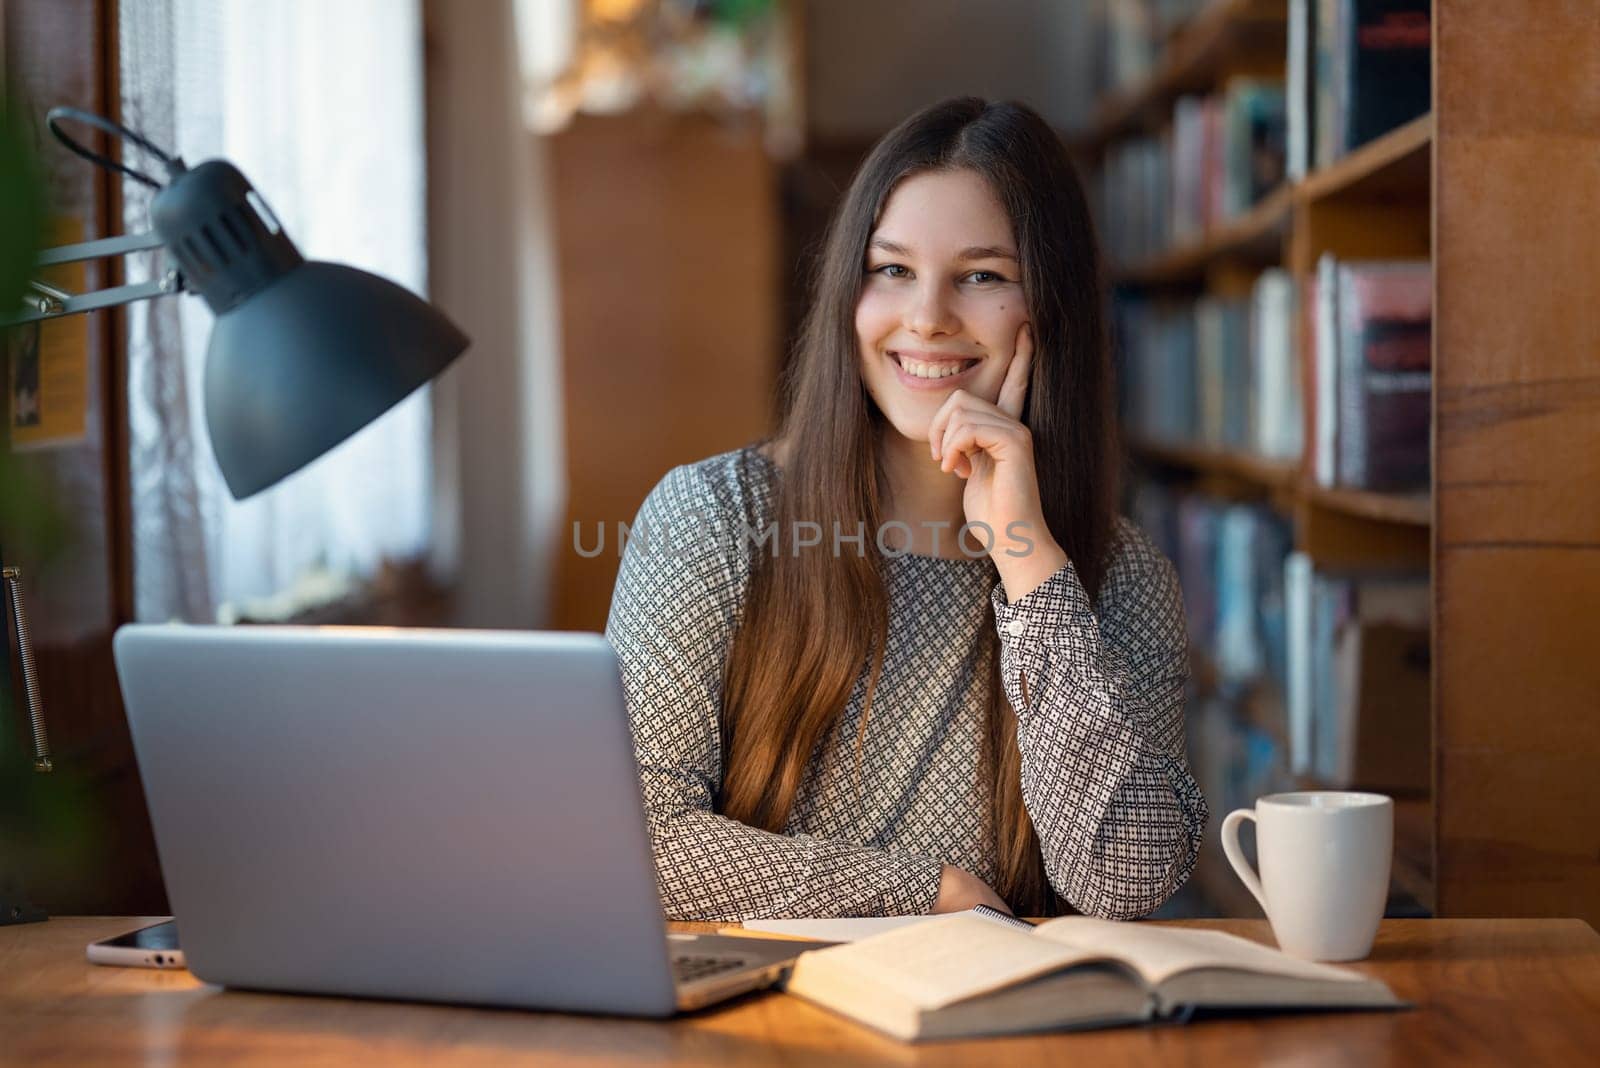 Cheerful female student sitting at a table in library with laptop, book and cup of tea in front of her by VitaliiPetrushenko